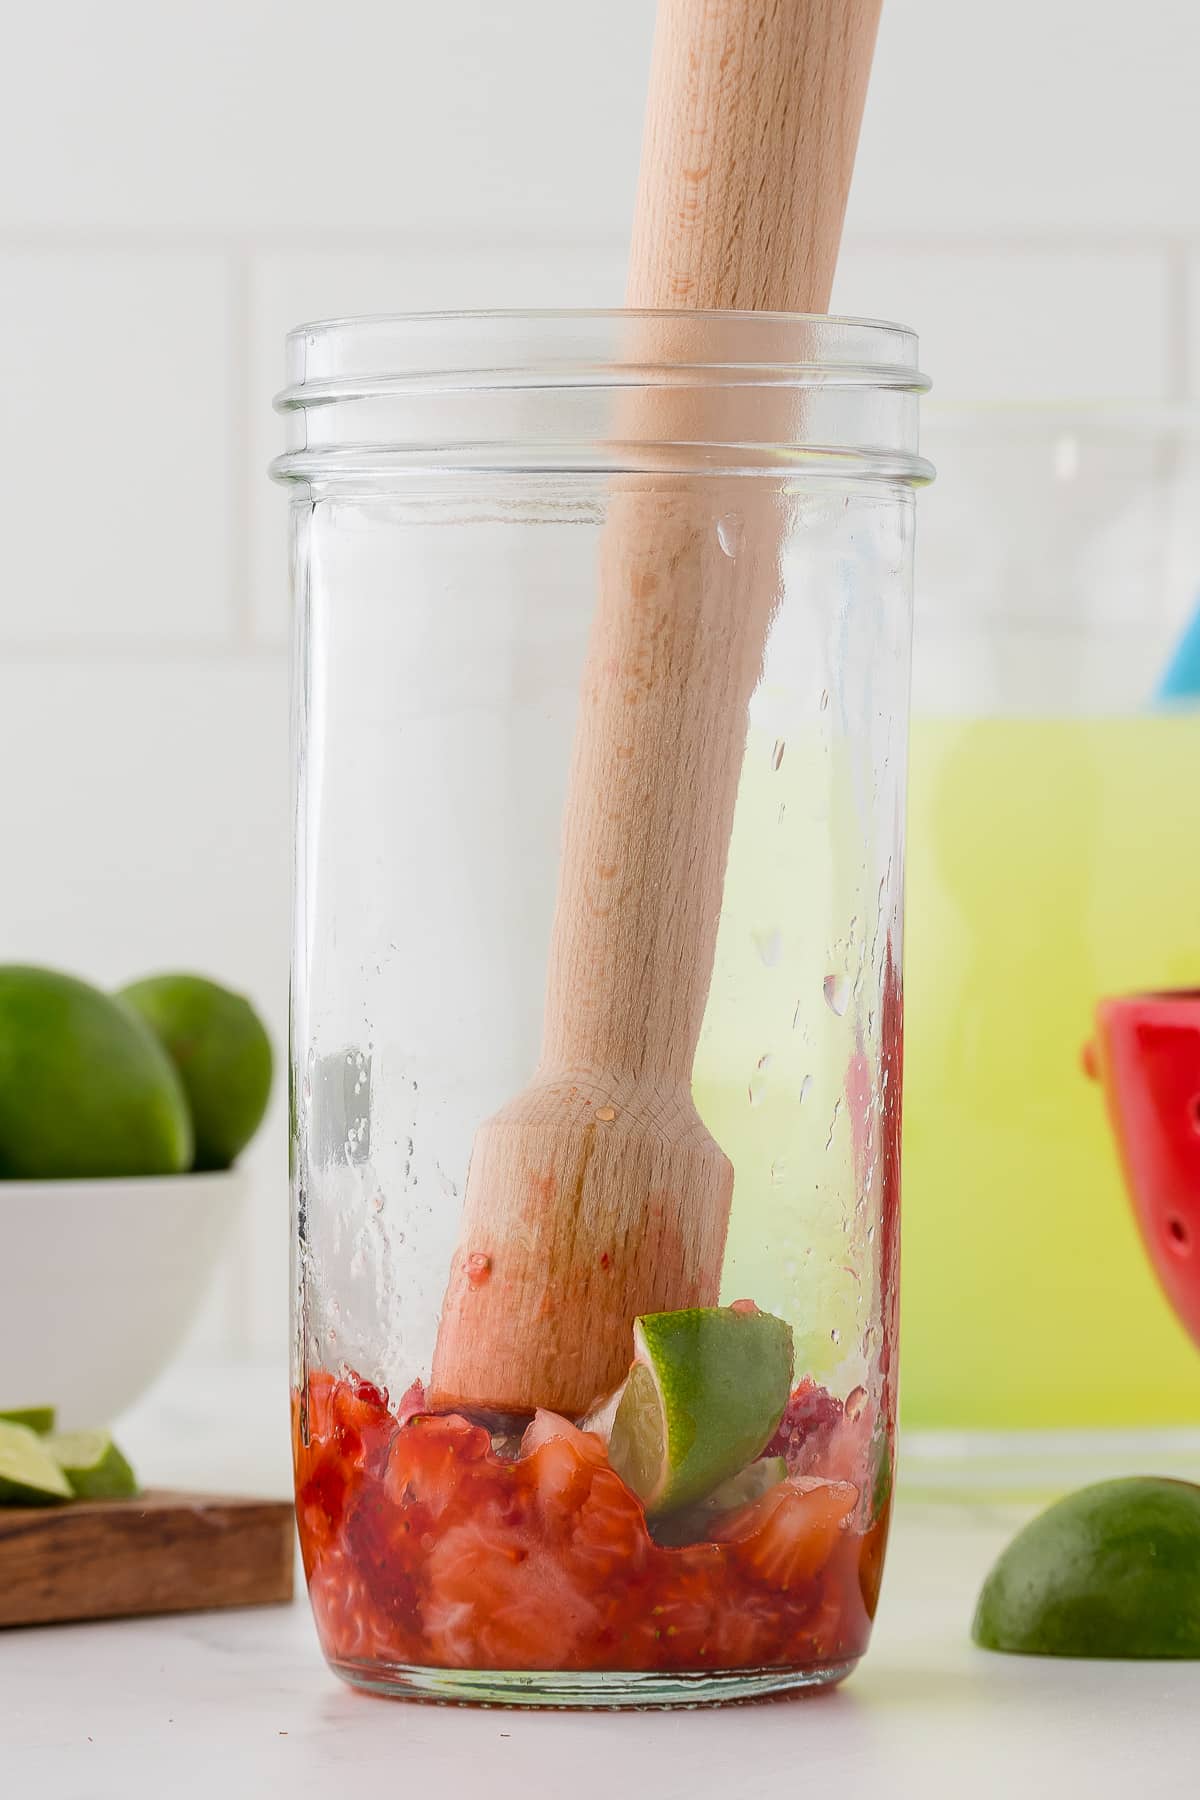 Strawberries and limes being mashed in the bottom of a clear glass jar